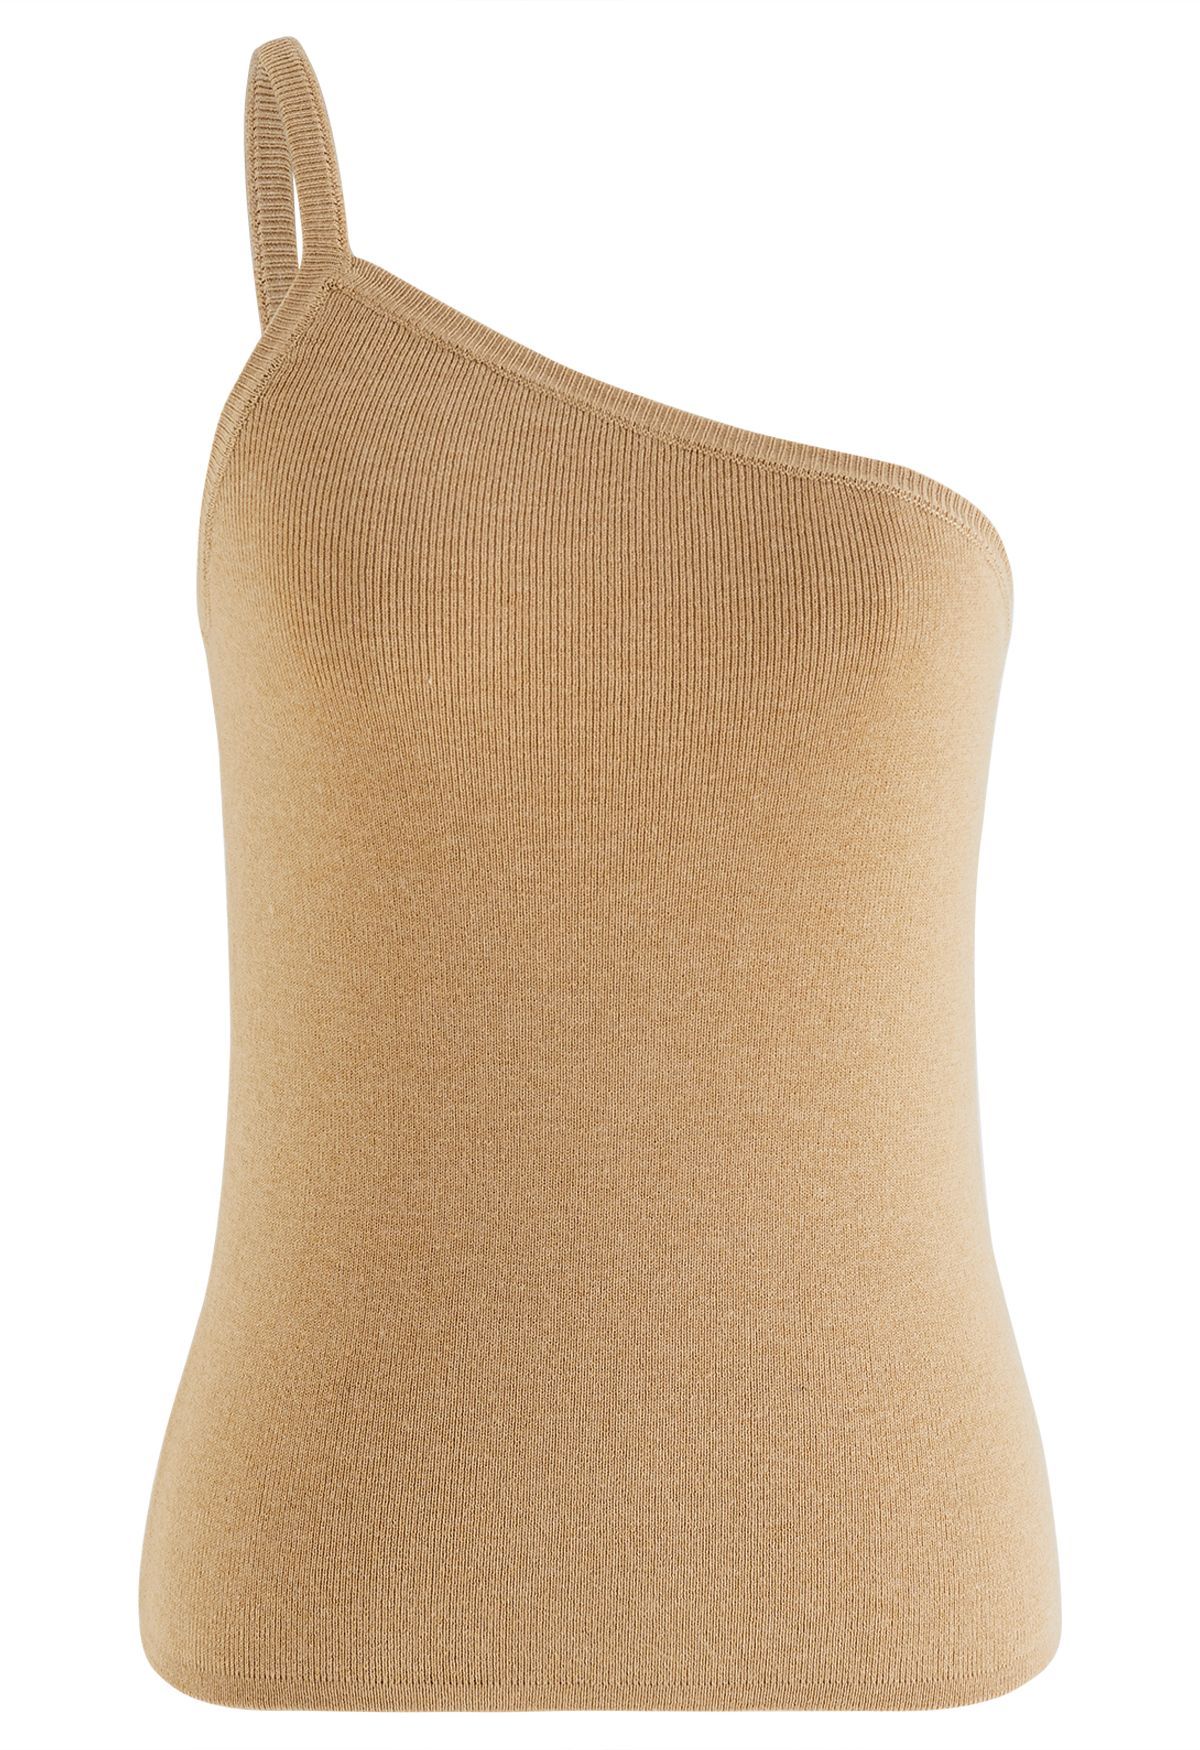 Strappy One-Shoulder Knit Tank Top in Light Tan | Chicwish